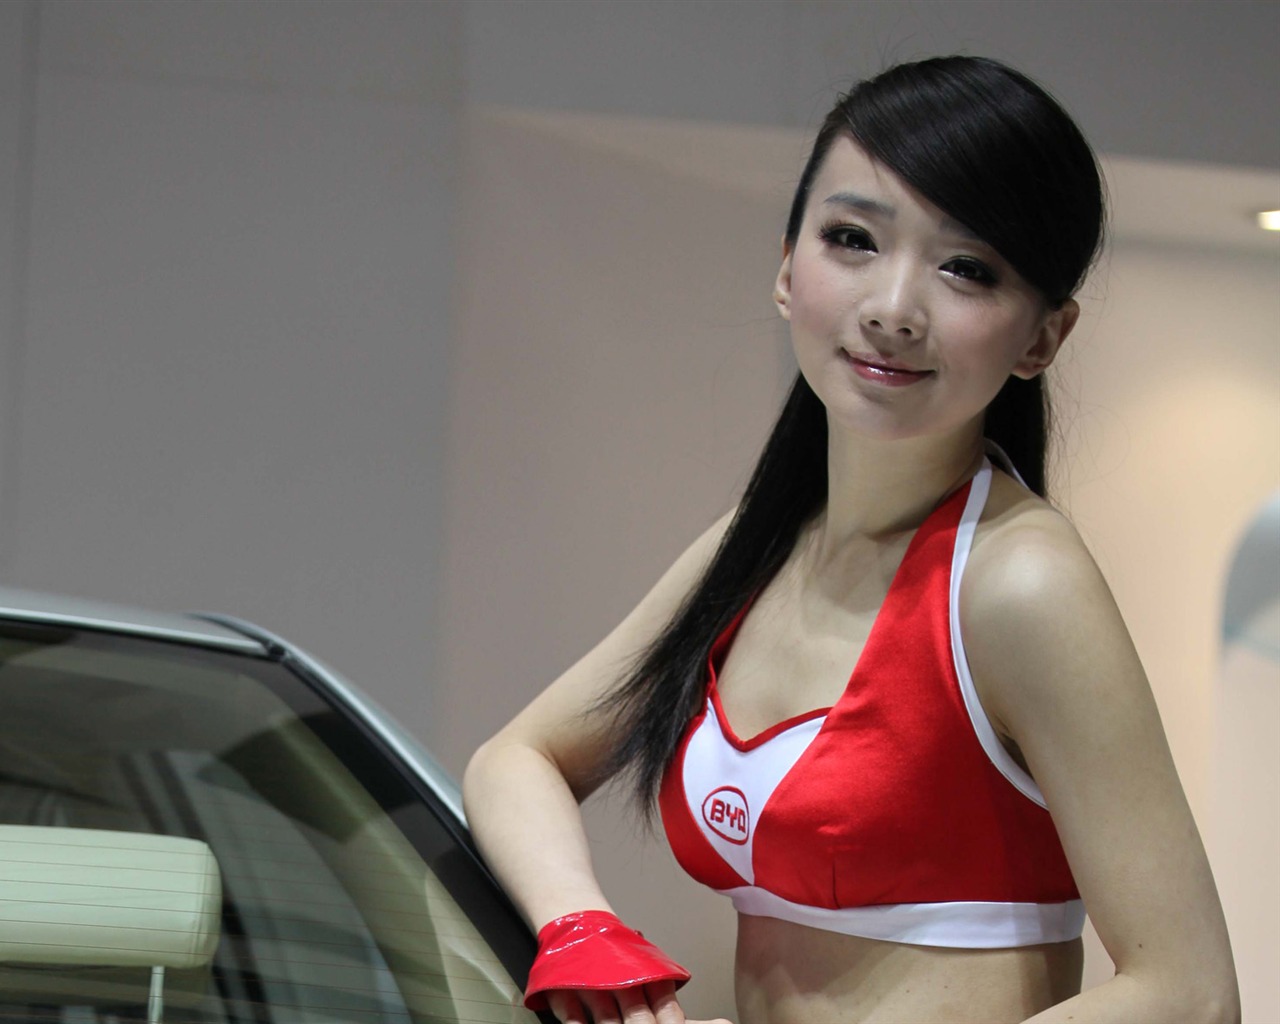 2010 Beijing International Auto Show beauty (1) (the wind chasing the clouds works) #20 - 1280x1024